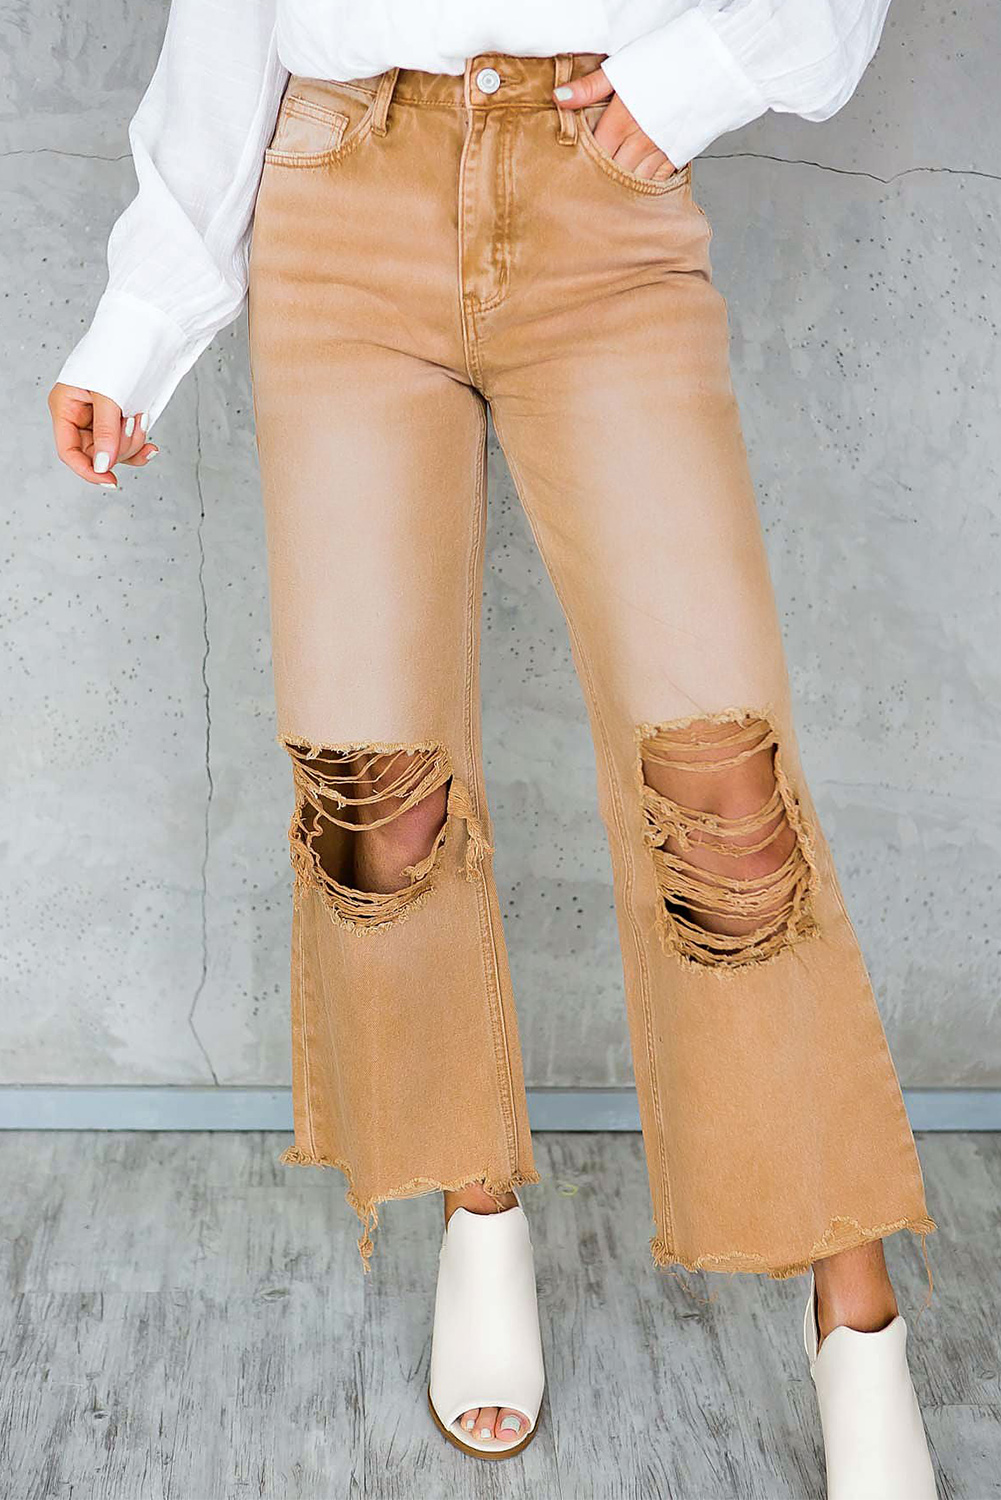 Shewin Wholesale Southern Brown Distressed Hollow-out High Waist Flare JEANS